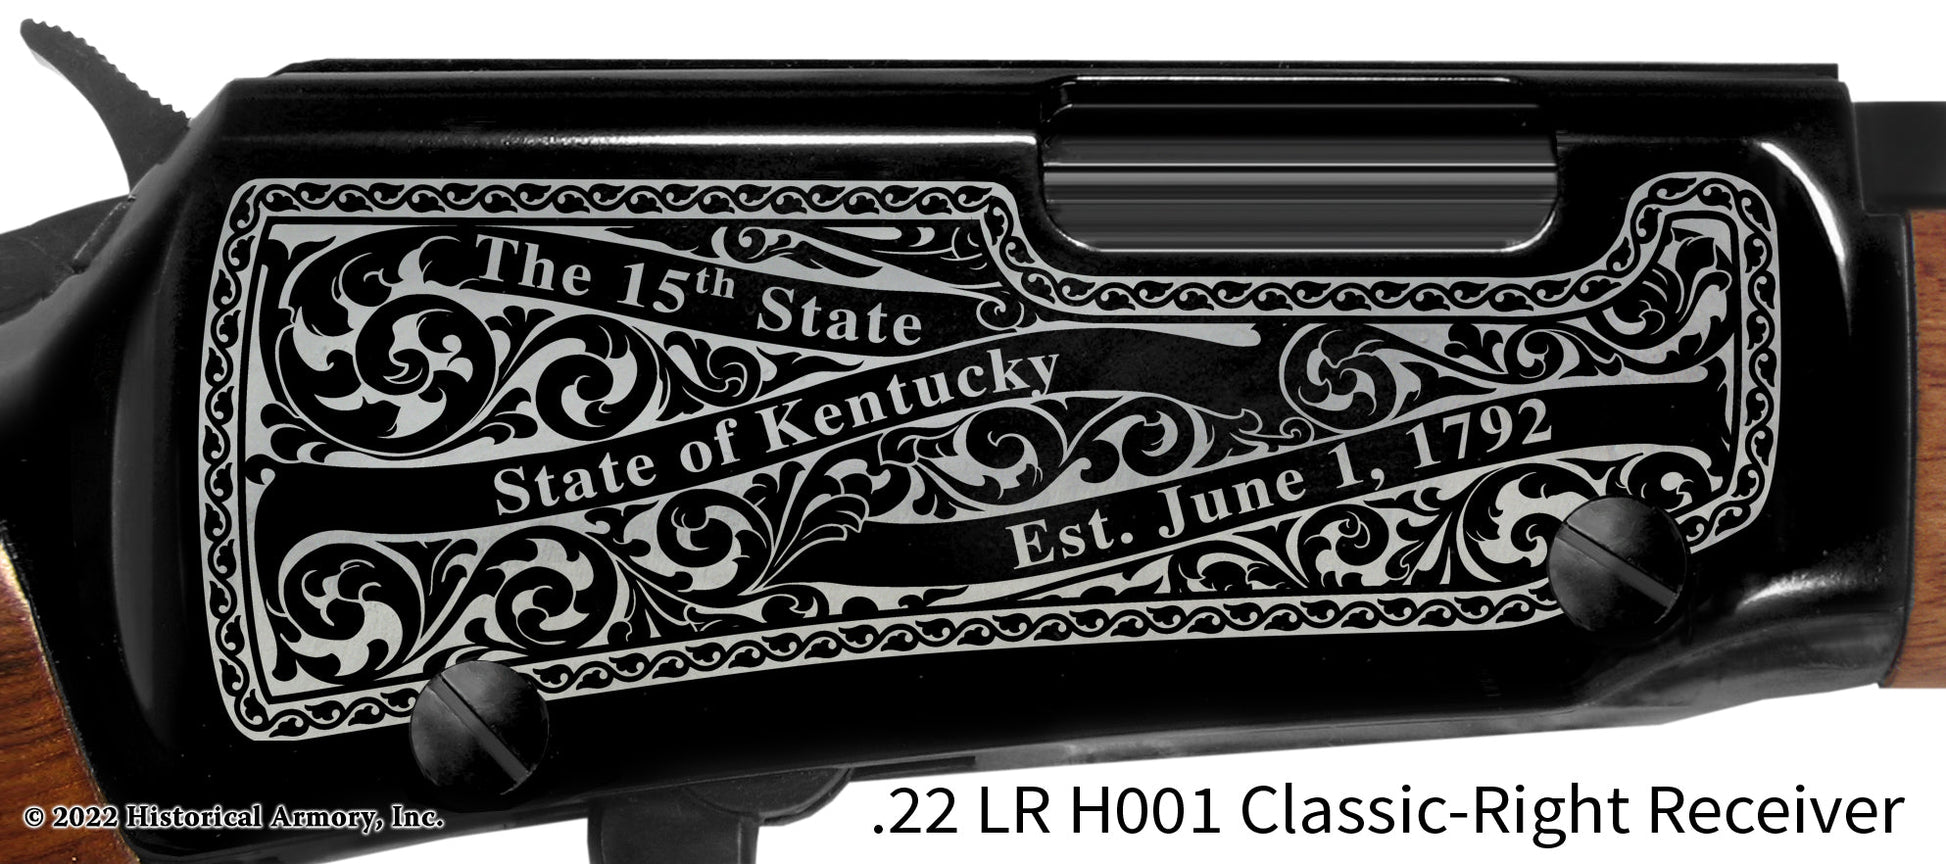 Boone County Kentucky Engraved Henry H001 Rifle